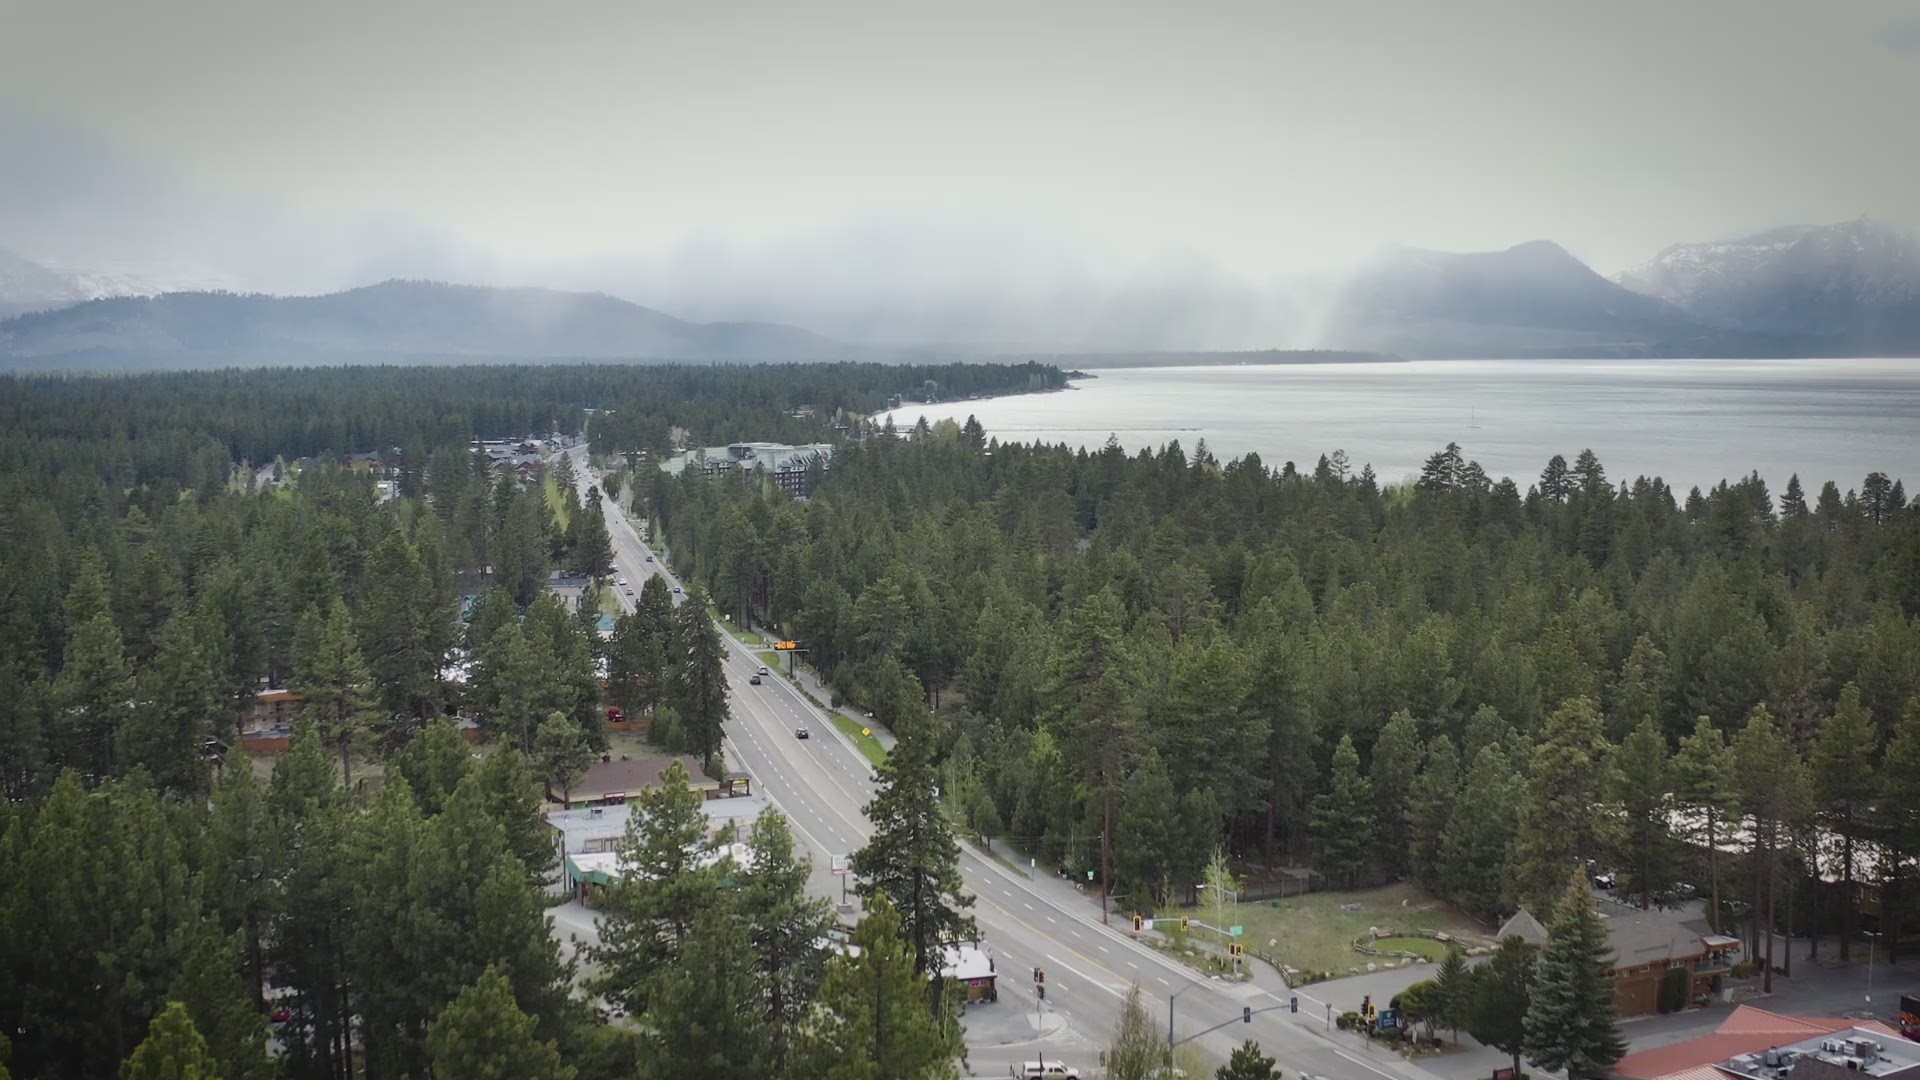 In California, Tahoe tourists are still not yet welcomed. But just down the road, in the Nevada side of Tahoe, things are very different.

Author: Andie Judson (TEGN